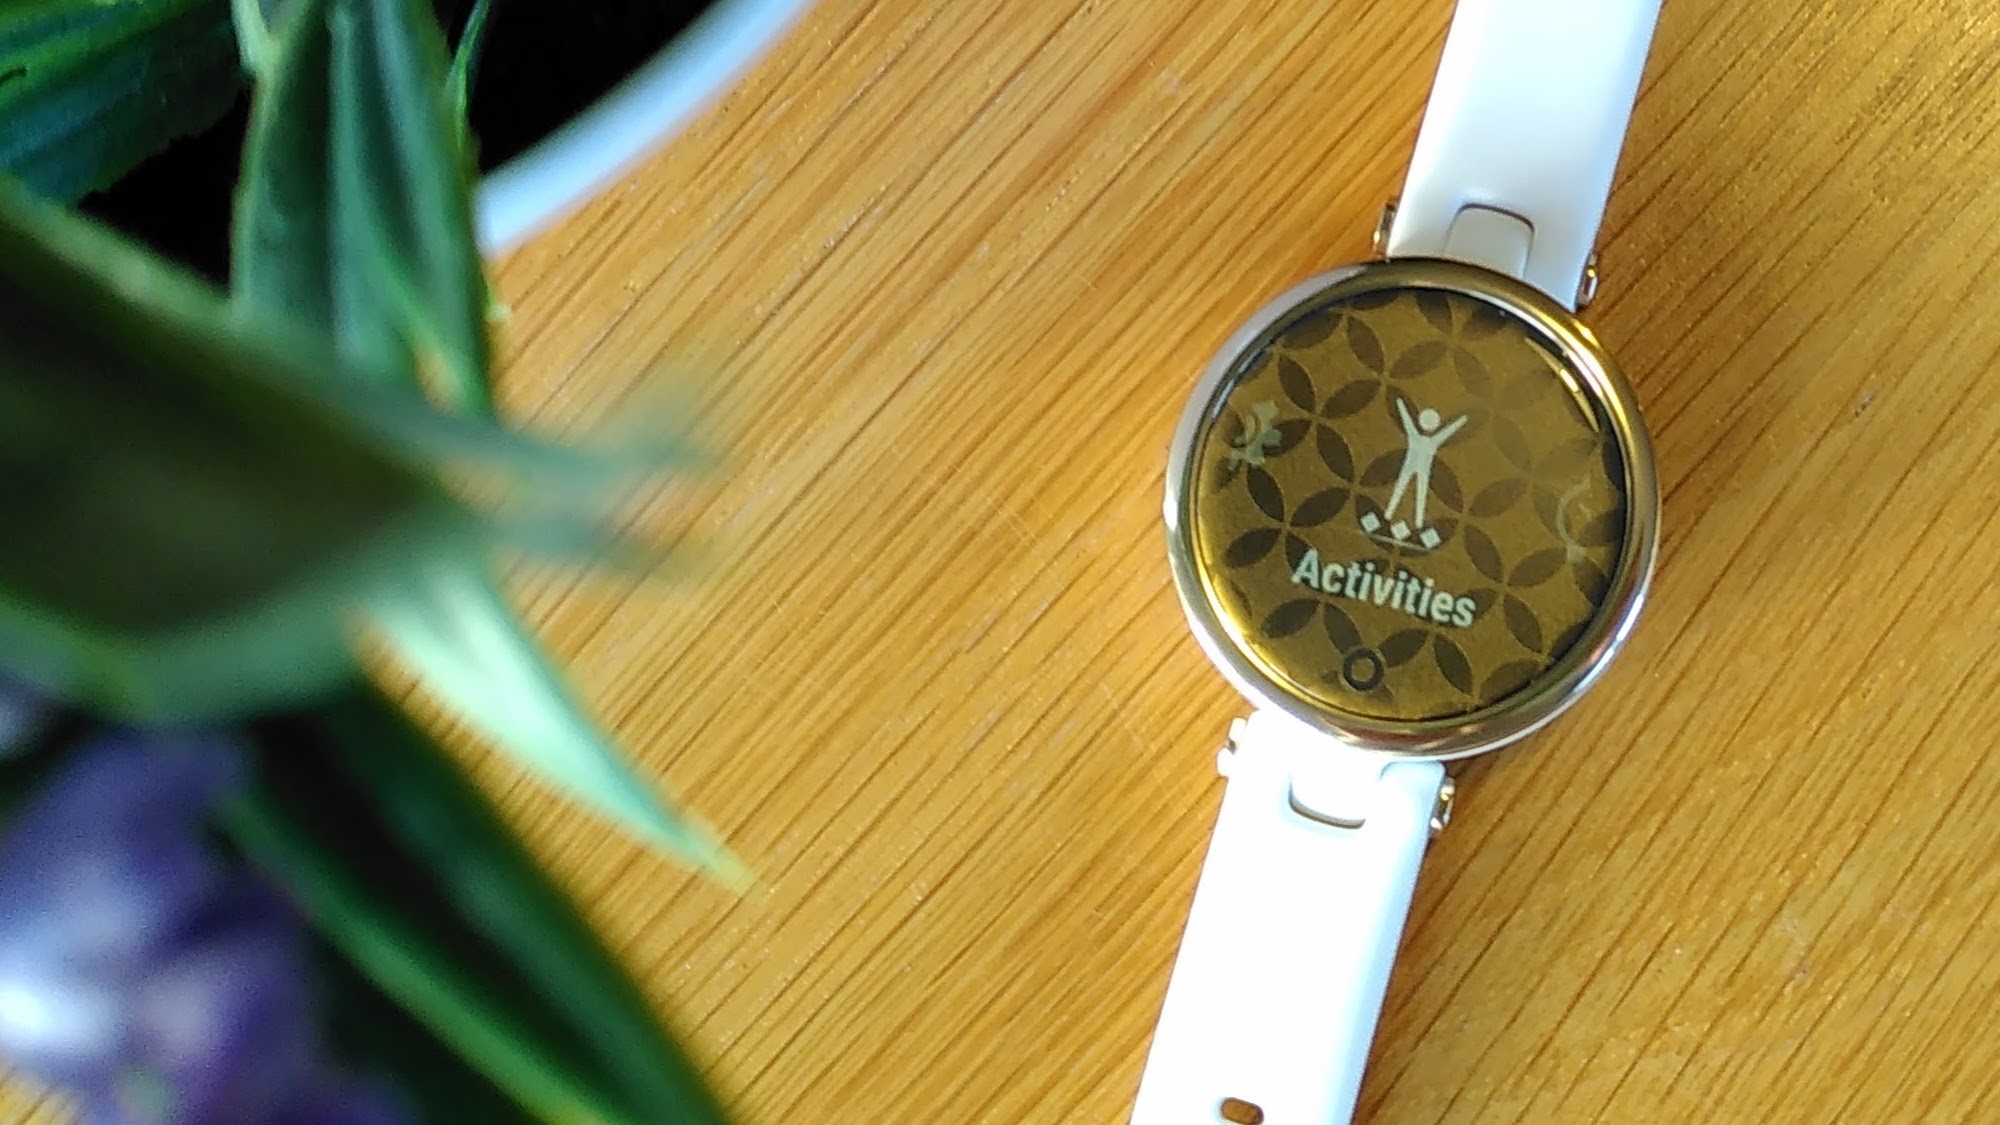 Garmin is preparing to release a hybrid smartwatch Lily 2, here's how the  novelty will look like